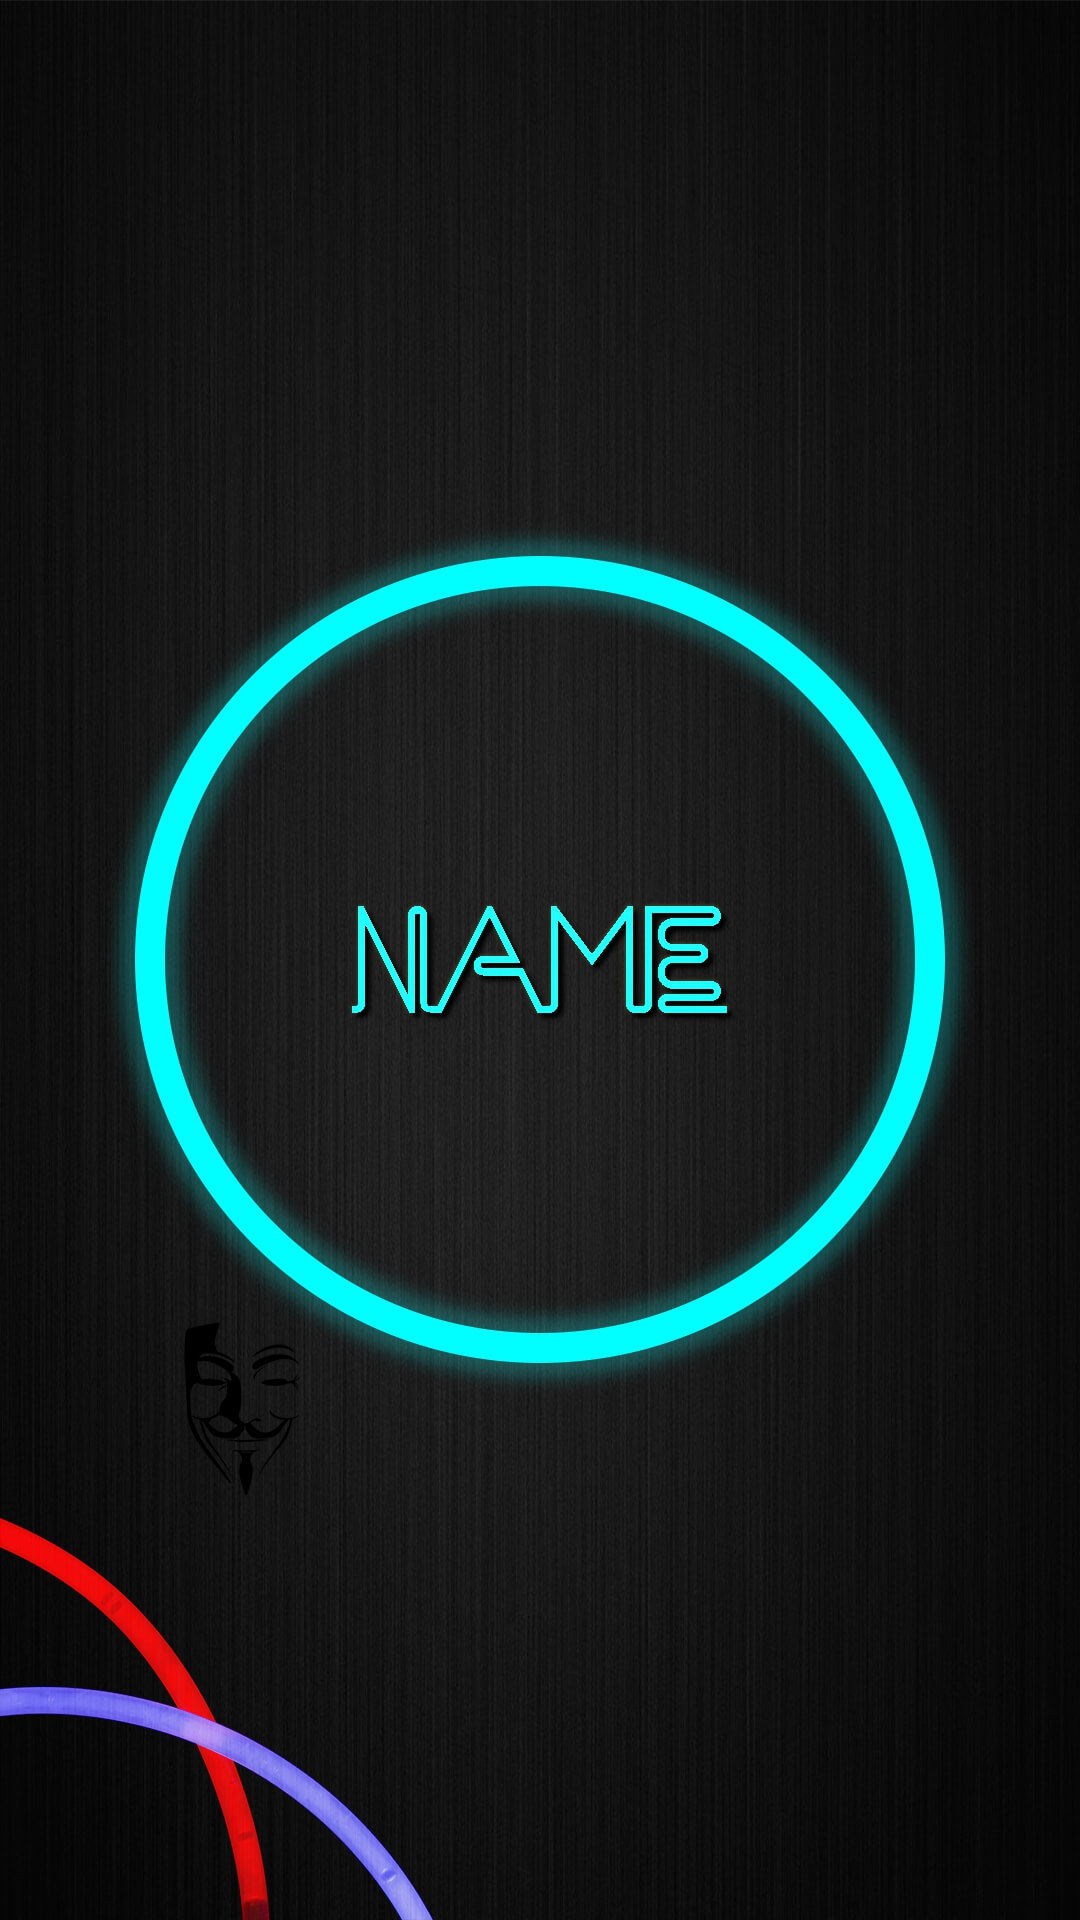 Names Of Neon Colors